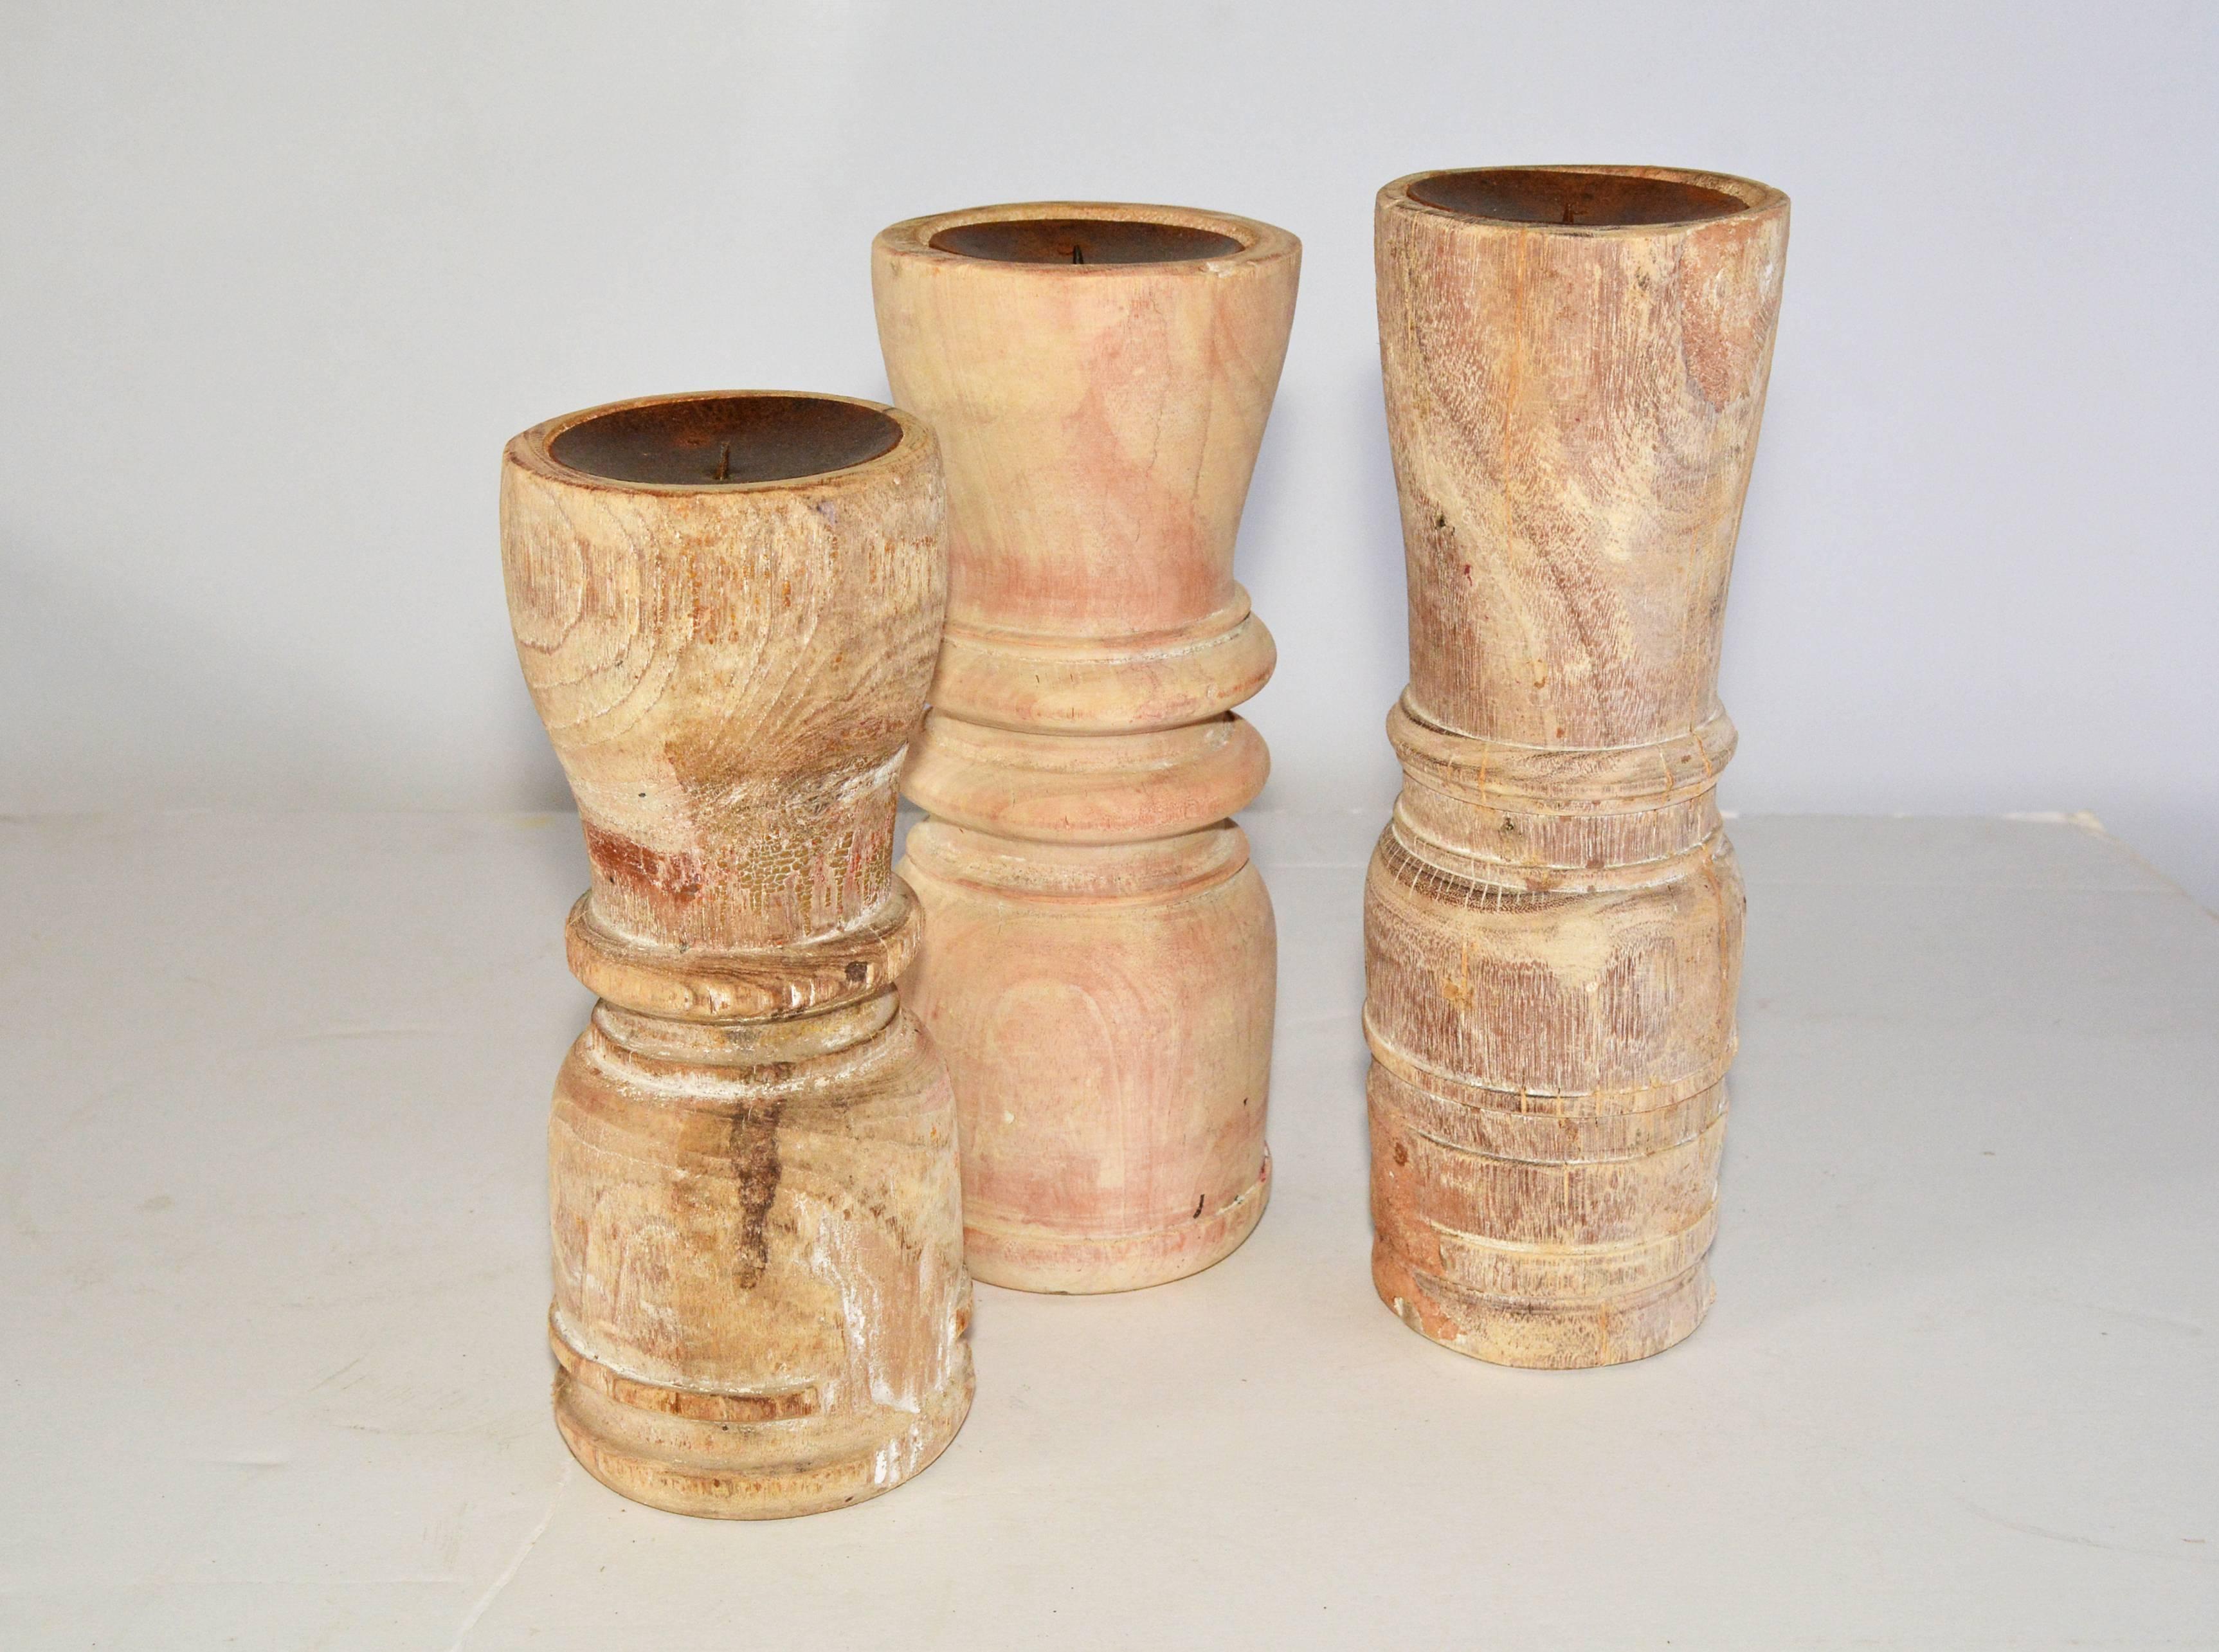 The rustic teak candleholders of three varying heights have concave tops lined in metal with centre spikes to hold fat pillar candles.

Measures: Diameter 4